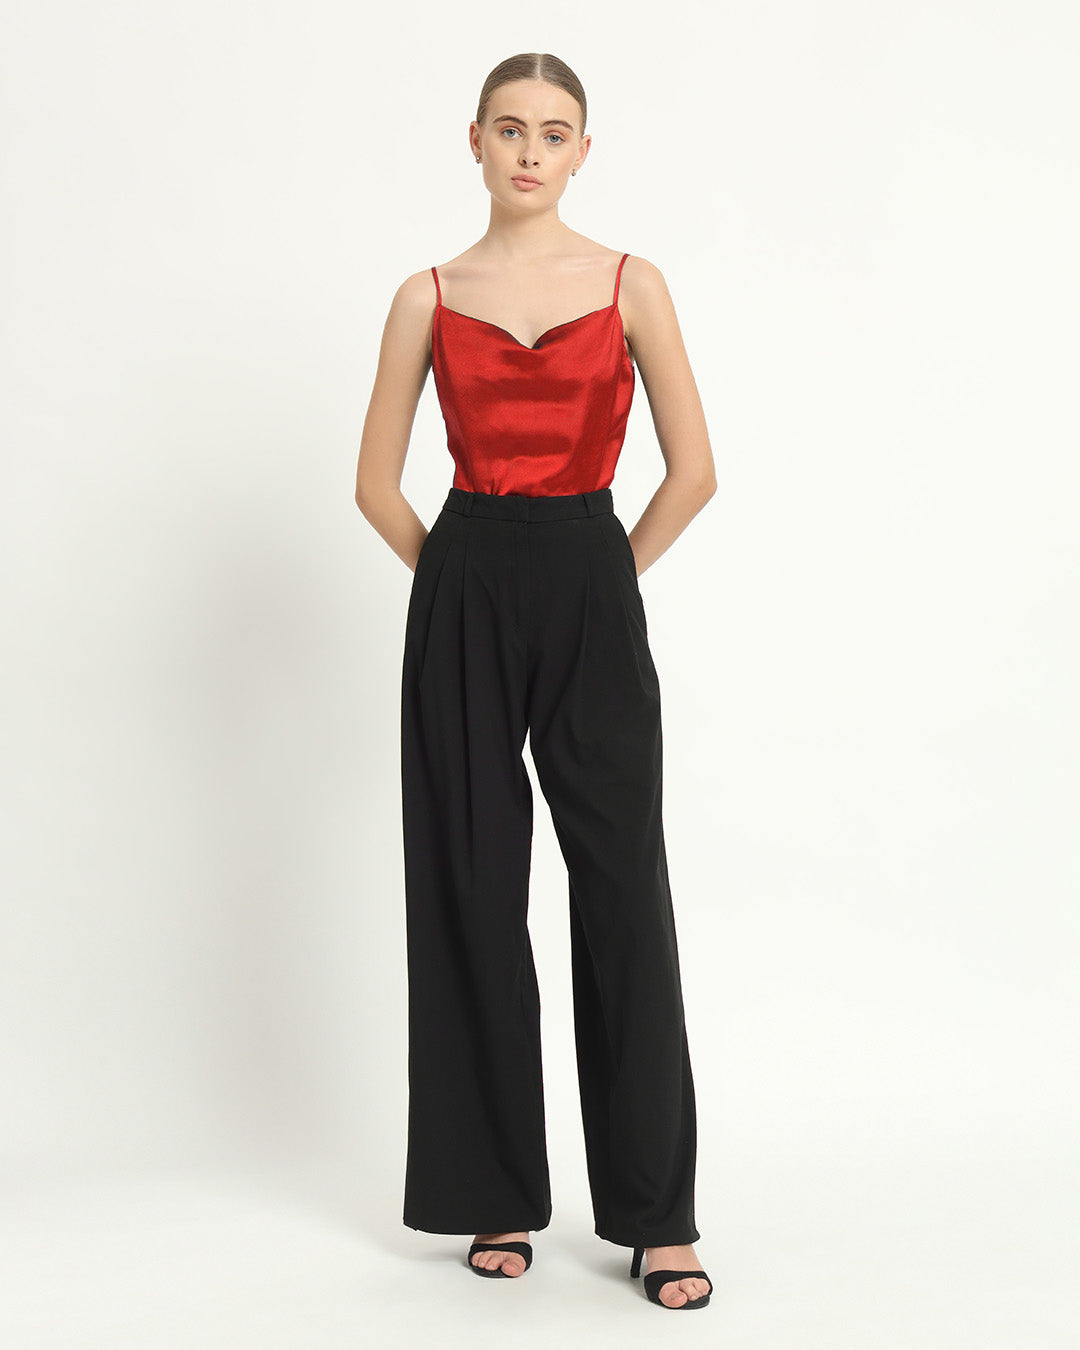 Satin Cowled Scarlet Red Camisole